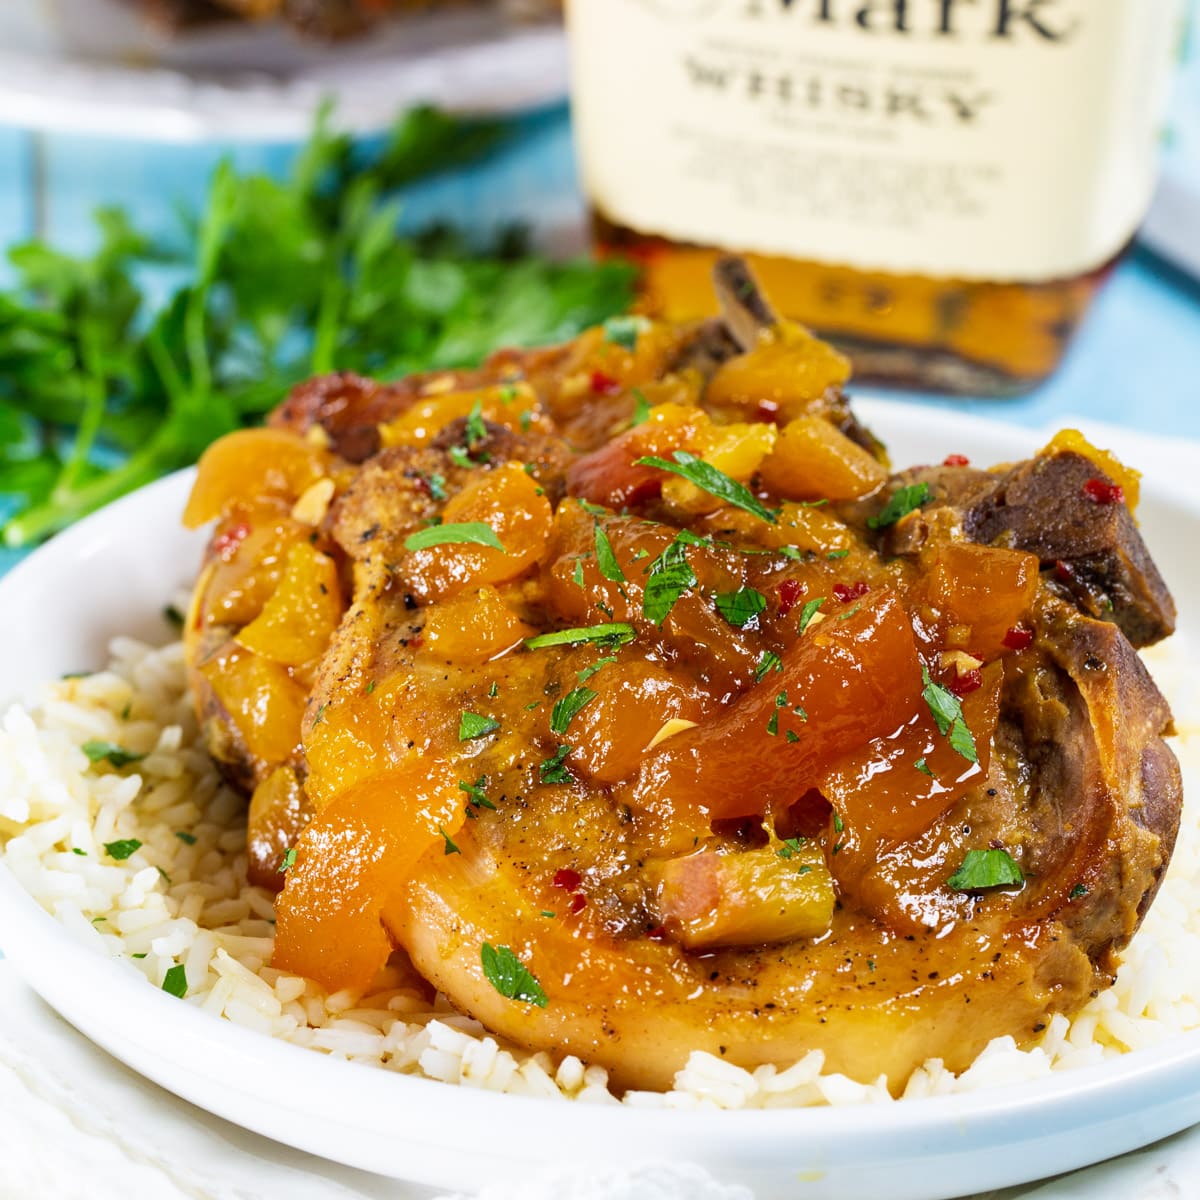 Slow Cooker Bourbon Peach Pork Chop over white rice on a plate.